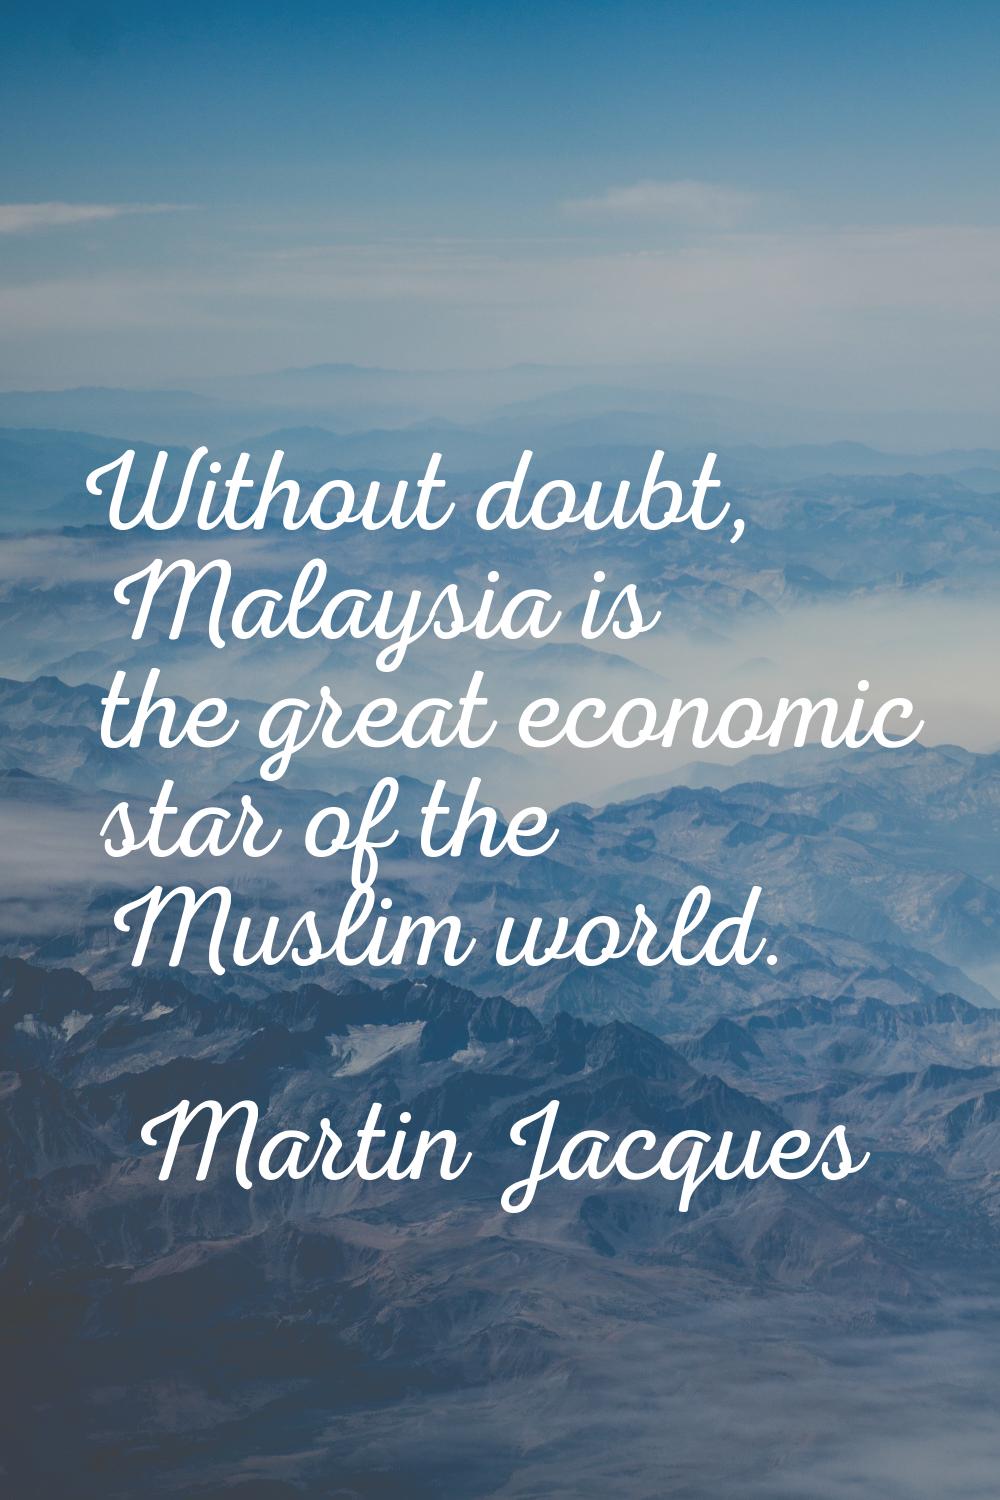 Without doubt, Malaysia is the great economic star of the Muslim world.